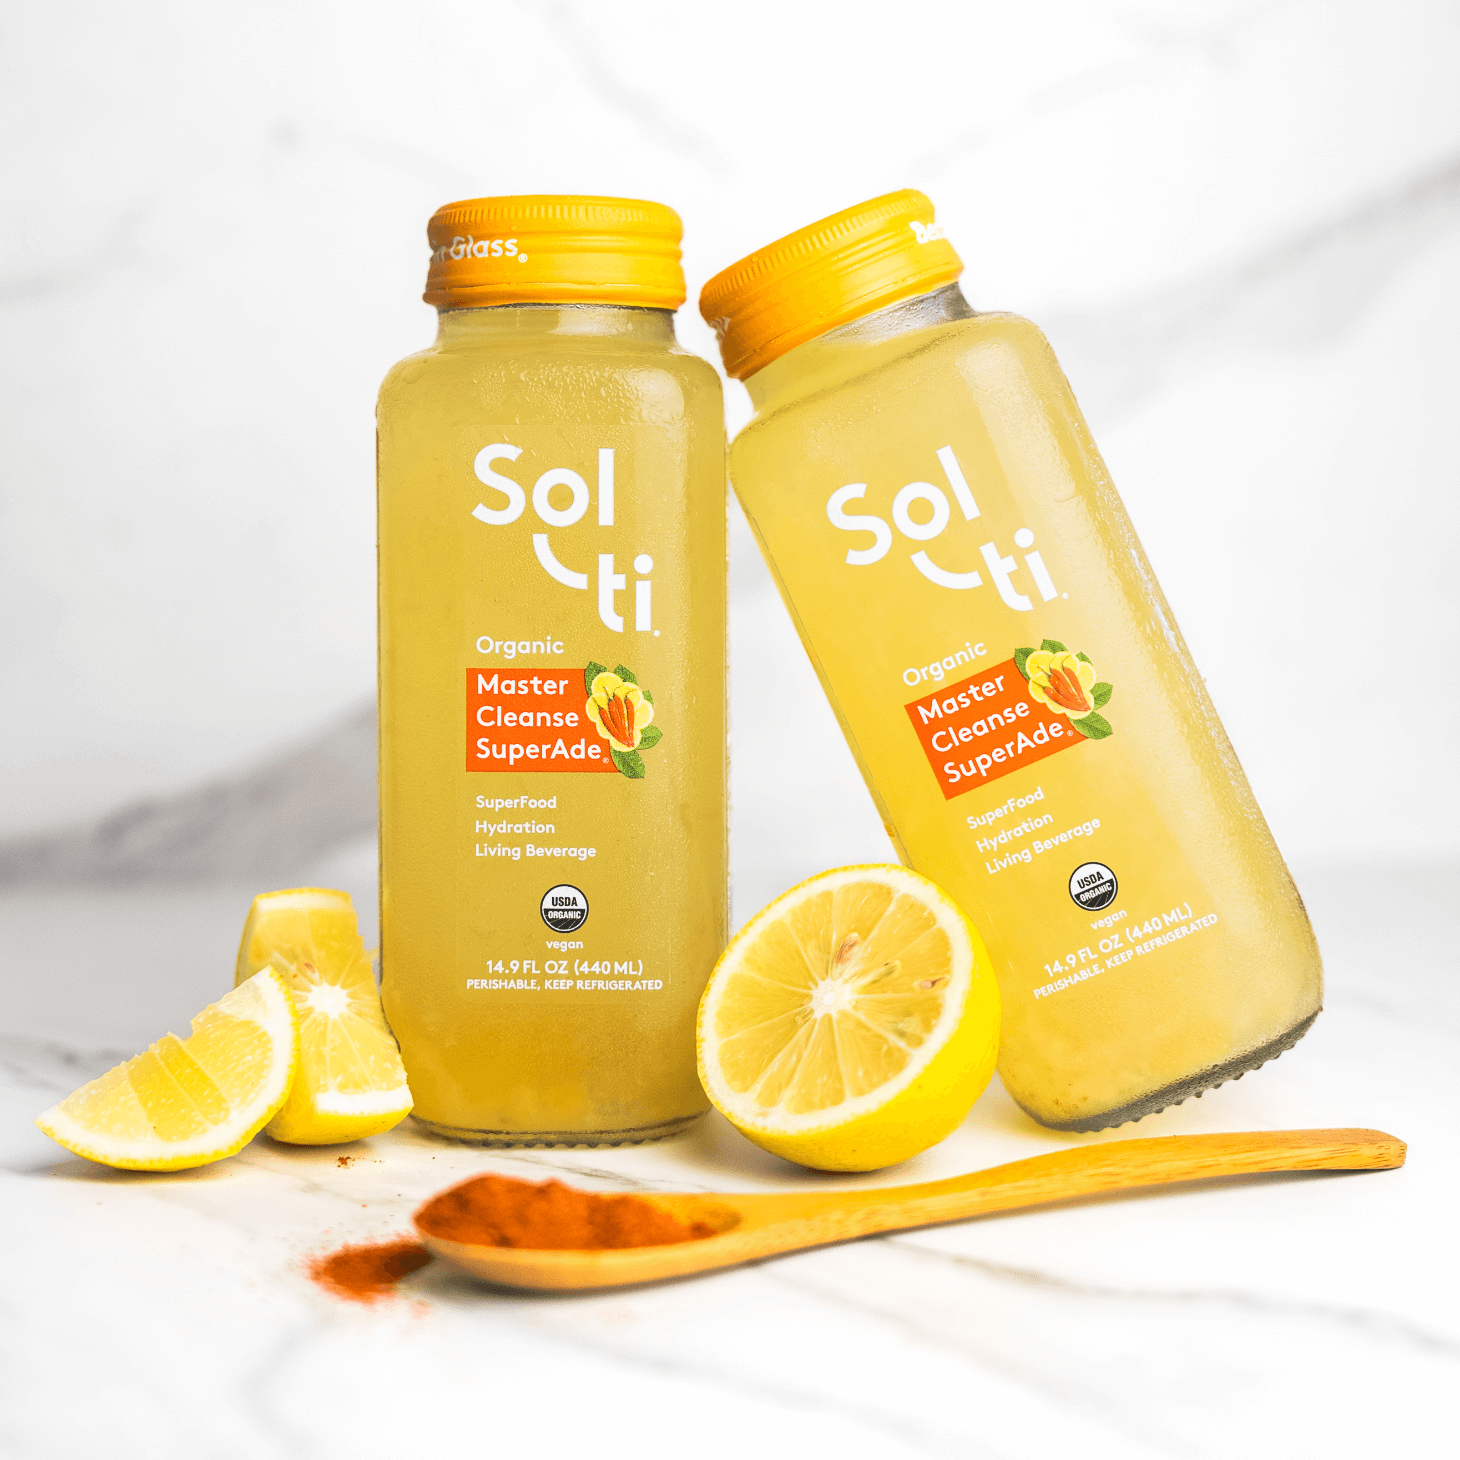 two Master Cleanse SuperAde bottles next to a spoon with cayenne and lemon slices